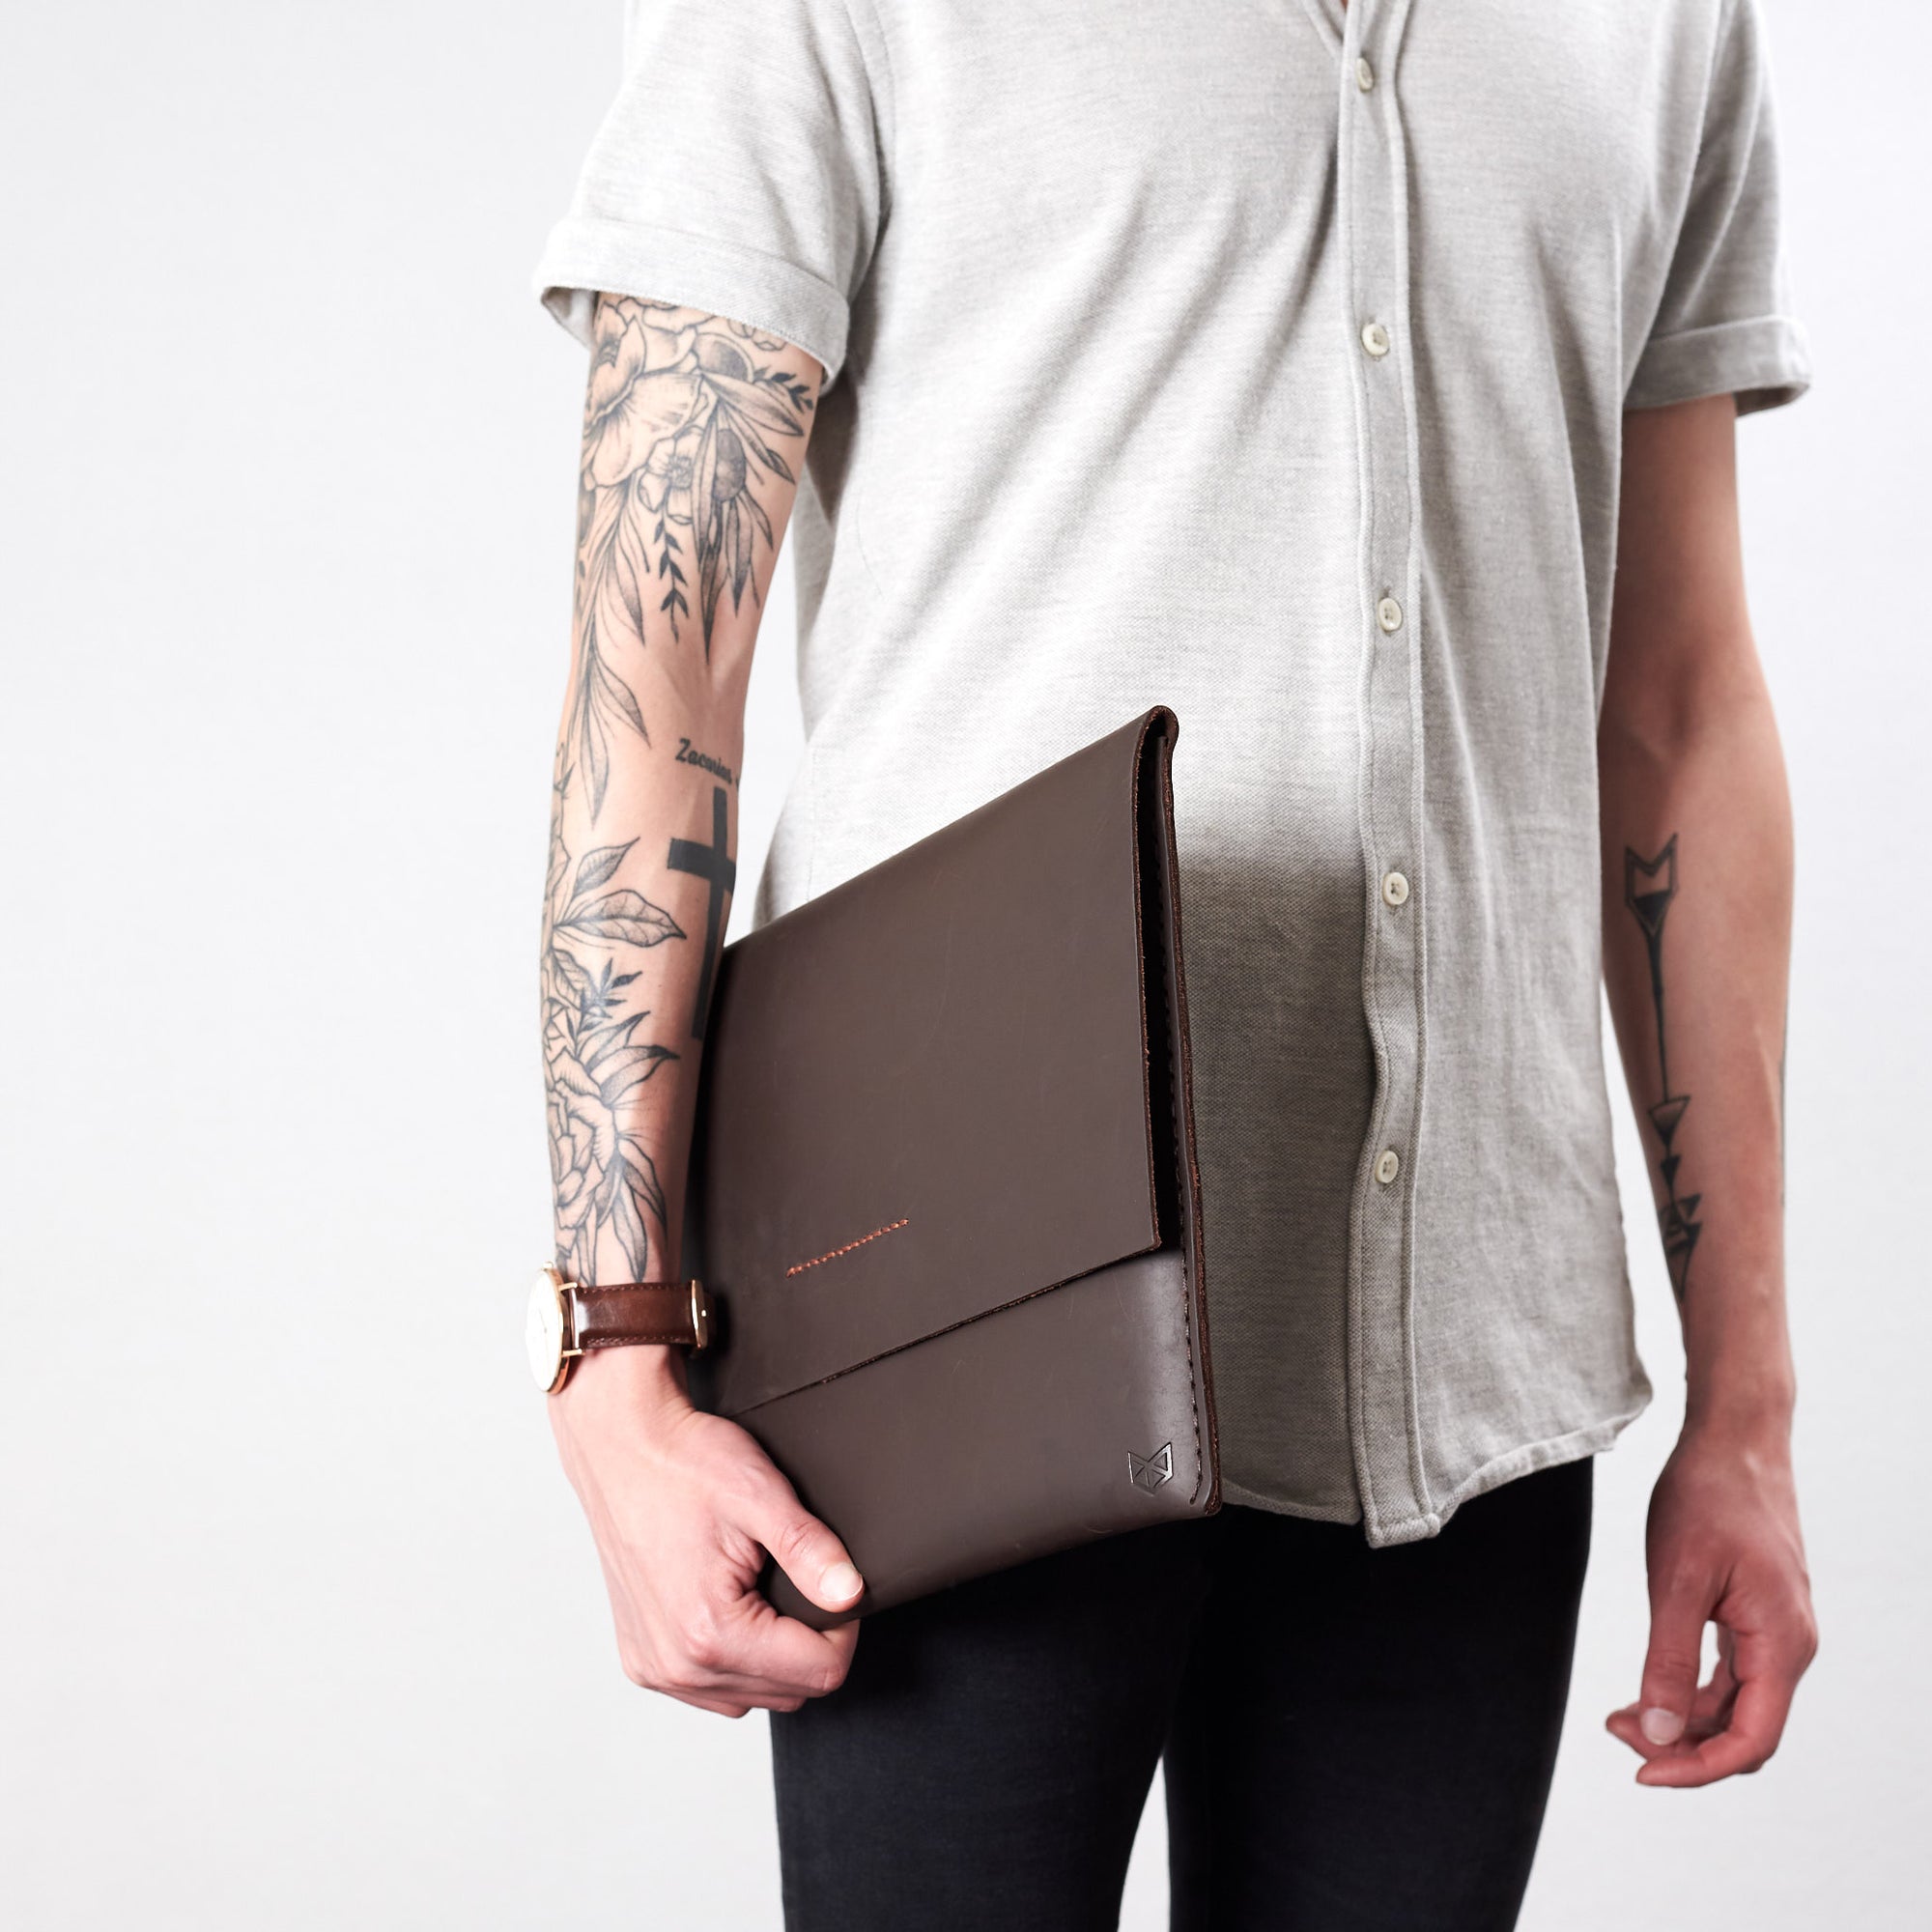 Style Side View. iPad Sleeve. Leather Case Brown for iPad by Capra Leather